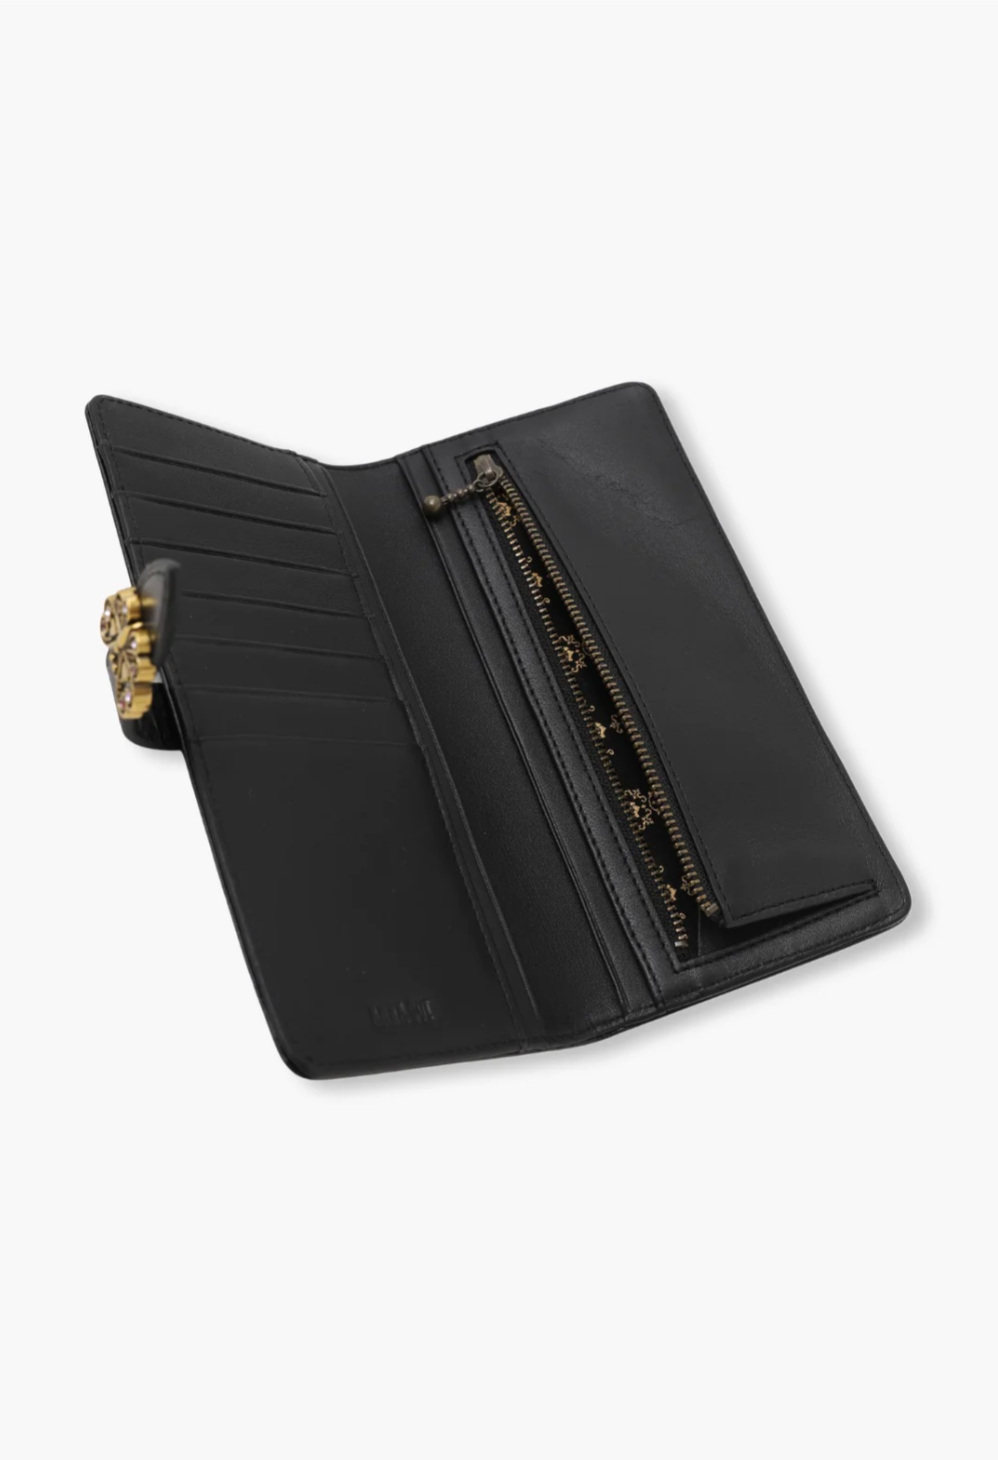 The Roger Wallet black, 6 card slots, 1 zipper compartment and 4 open compartments